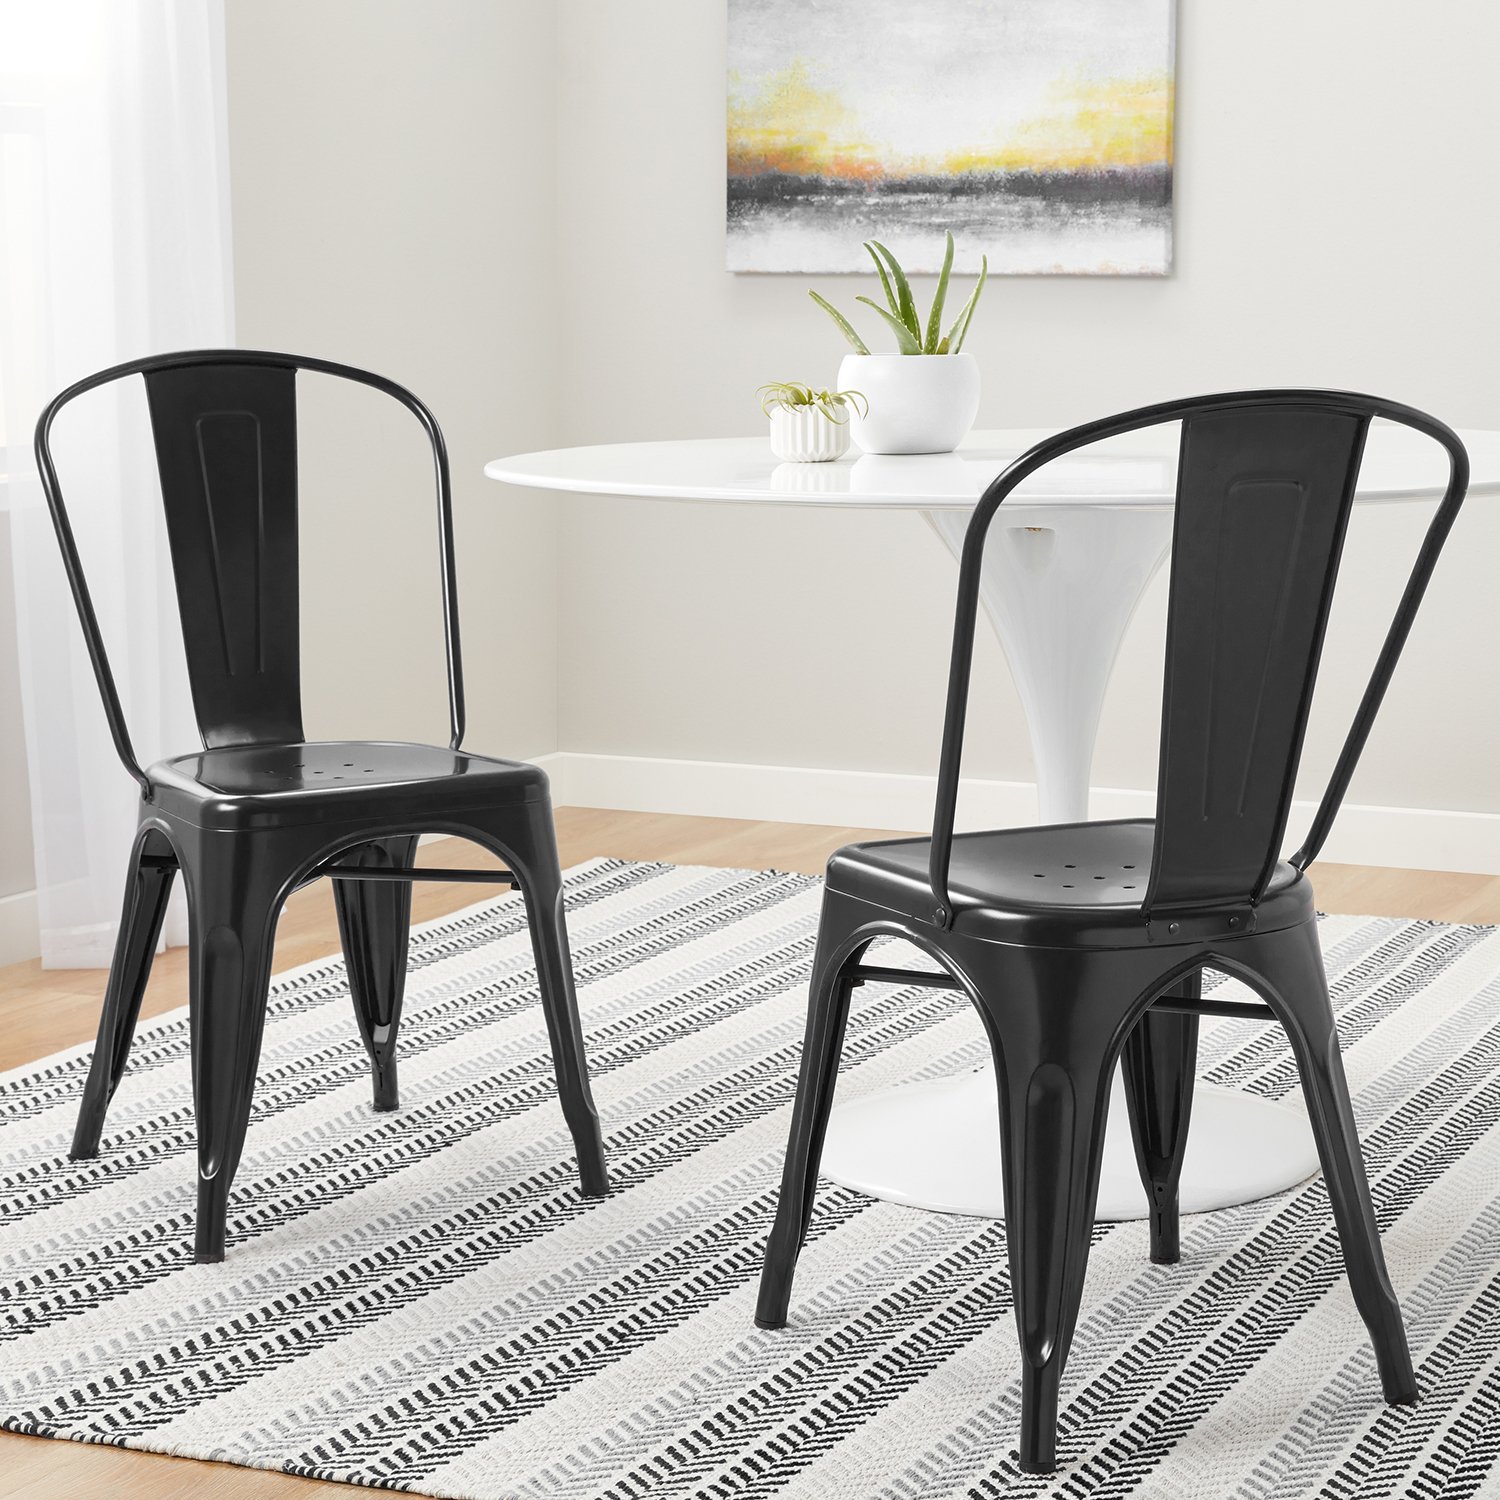 What Are The Advantages Of Metal Chairs?